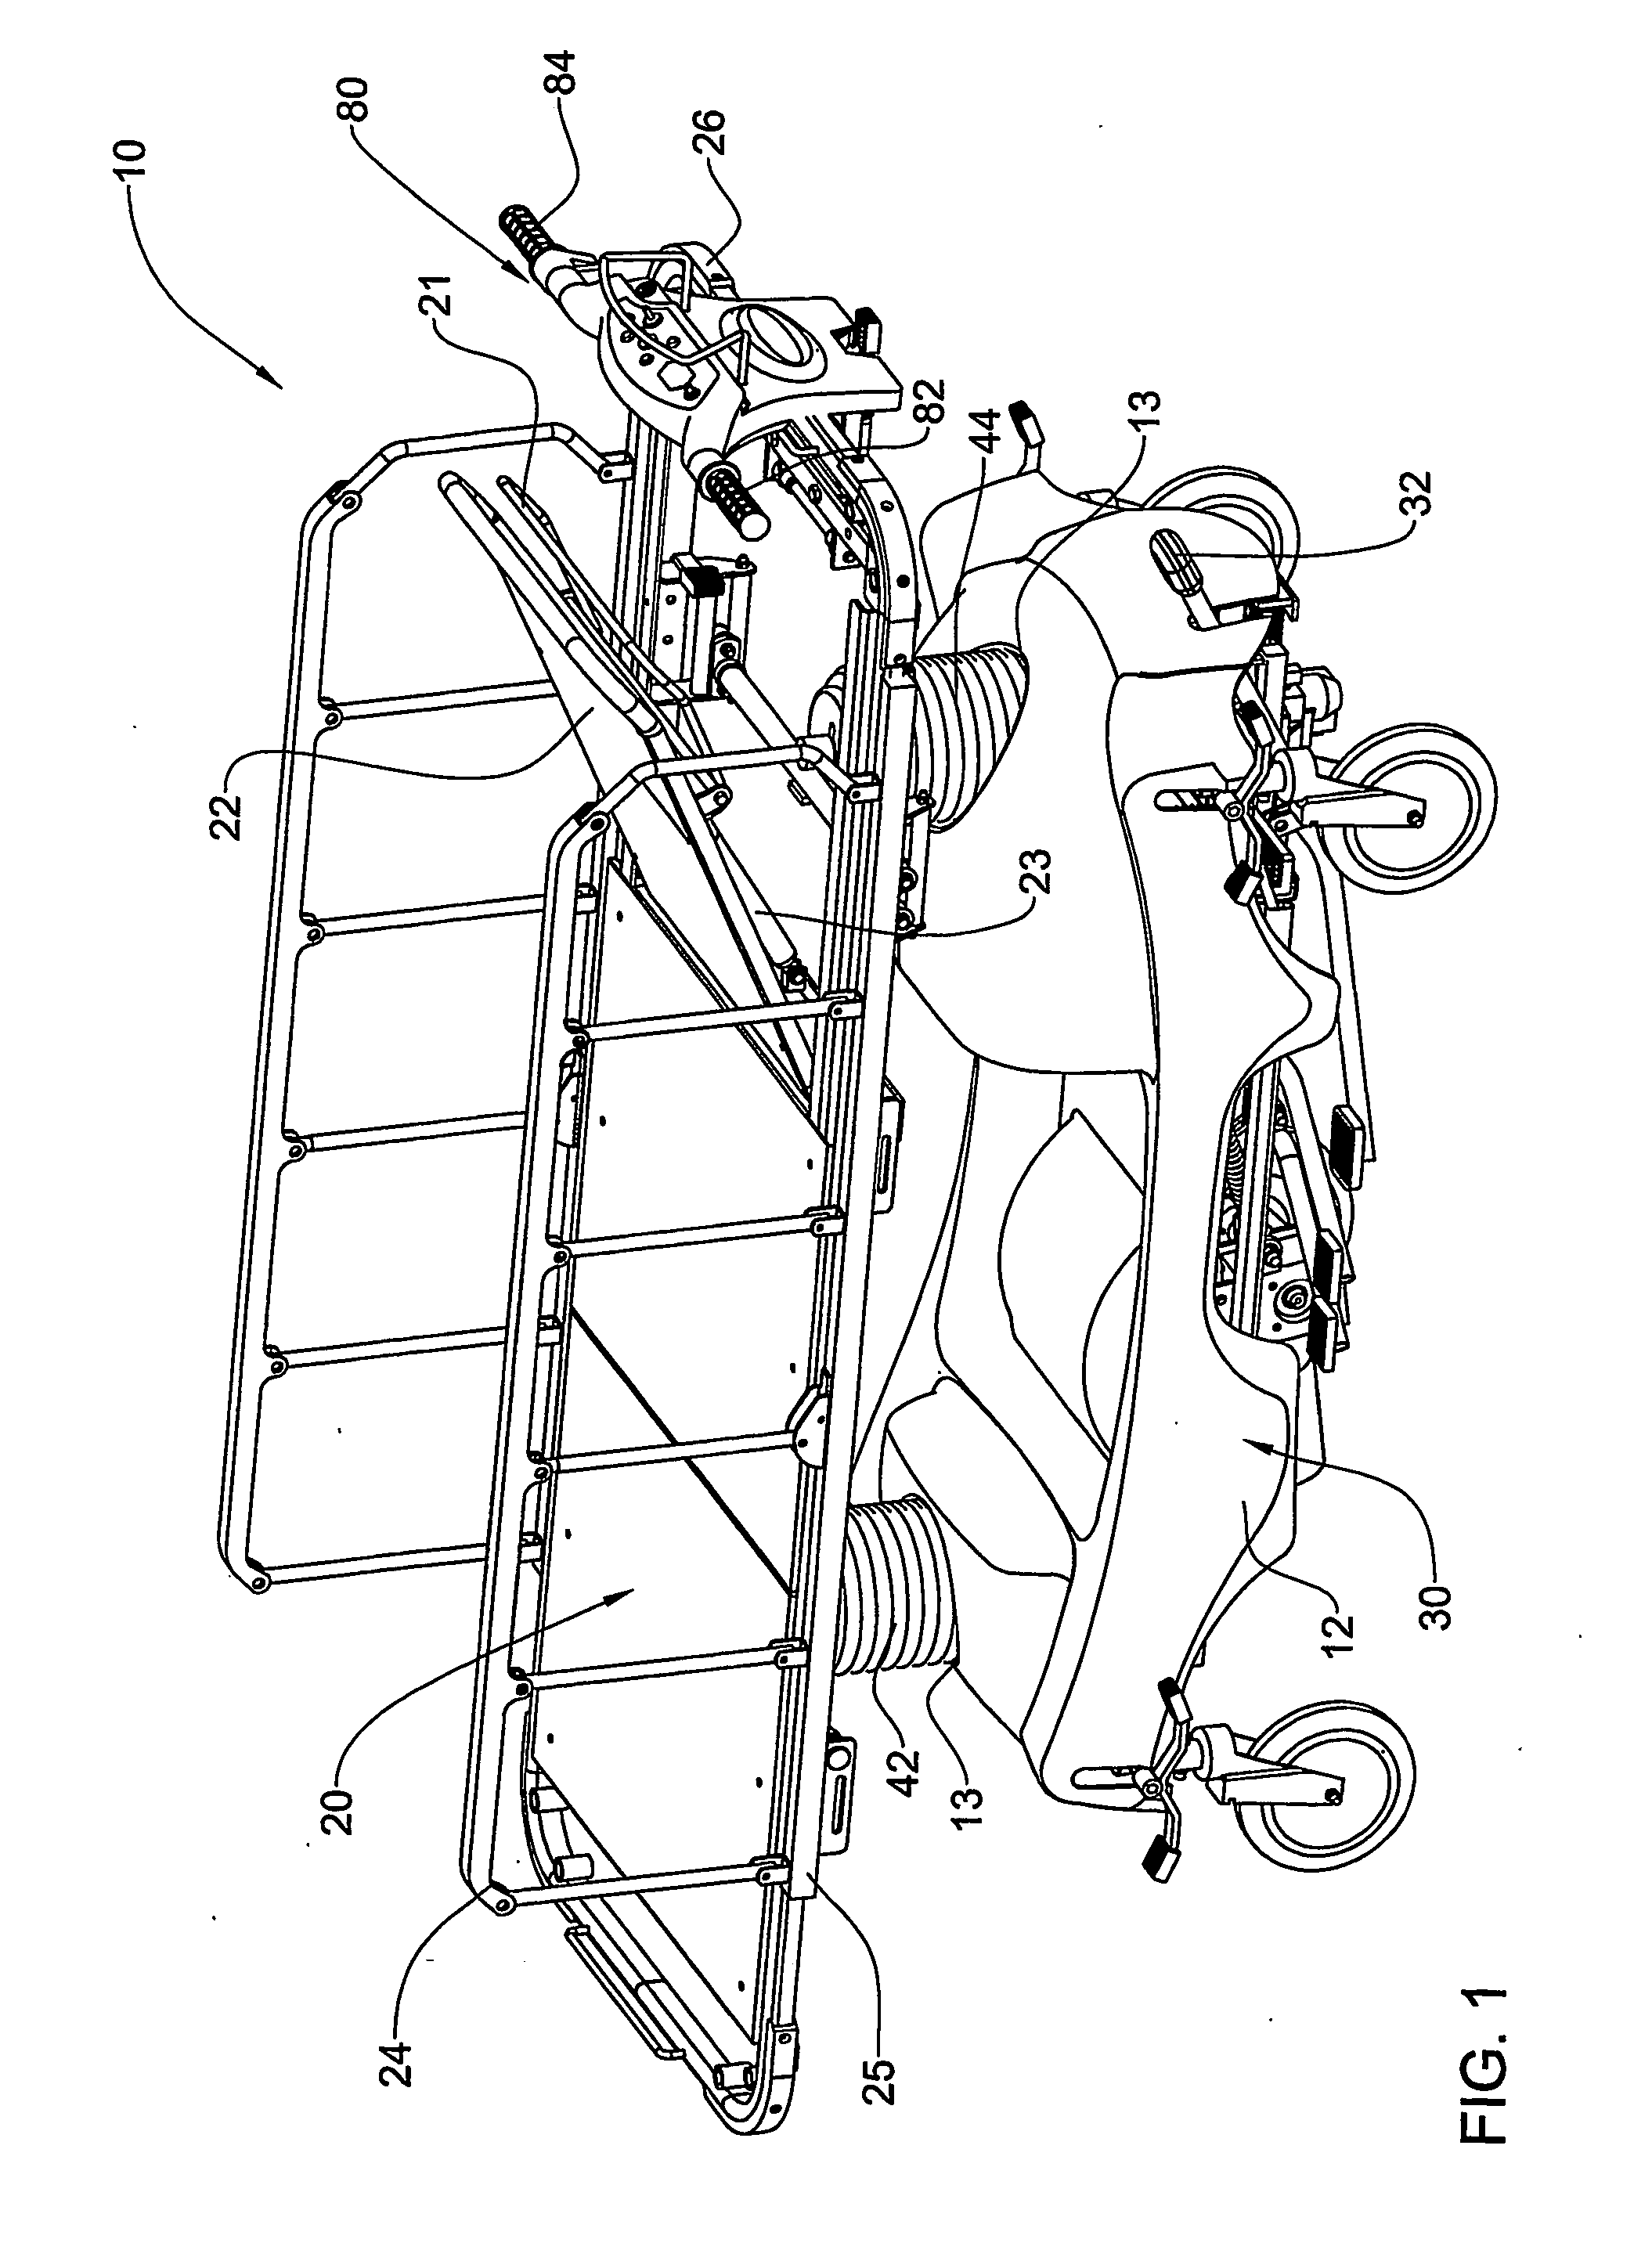 Maneuverable Device for Transporting Loads Over a Surface